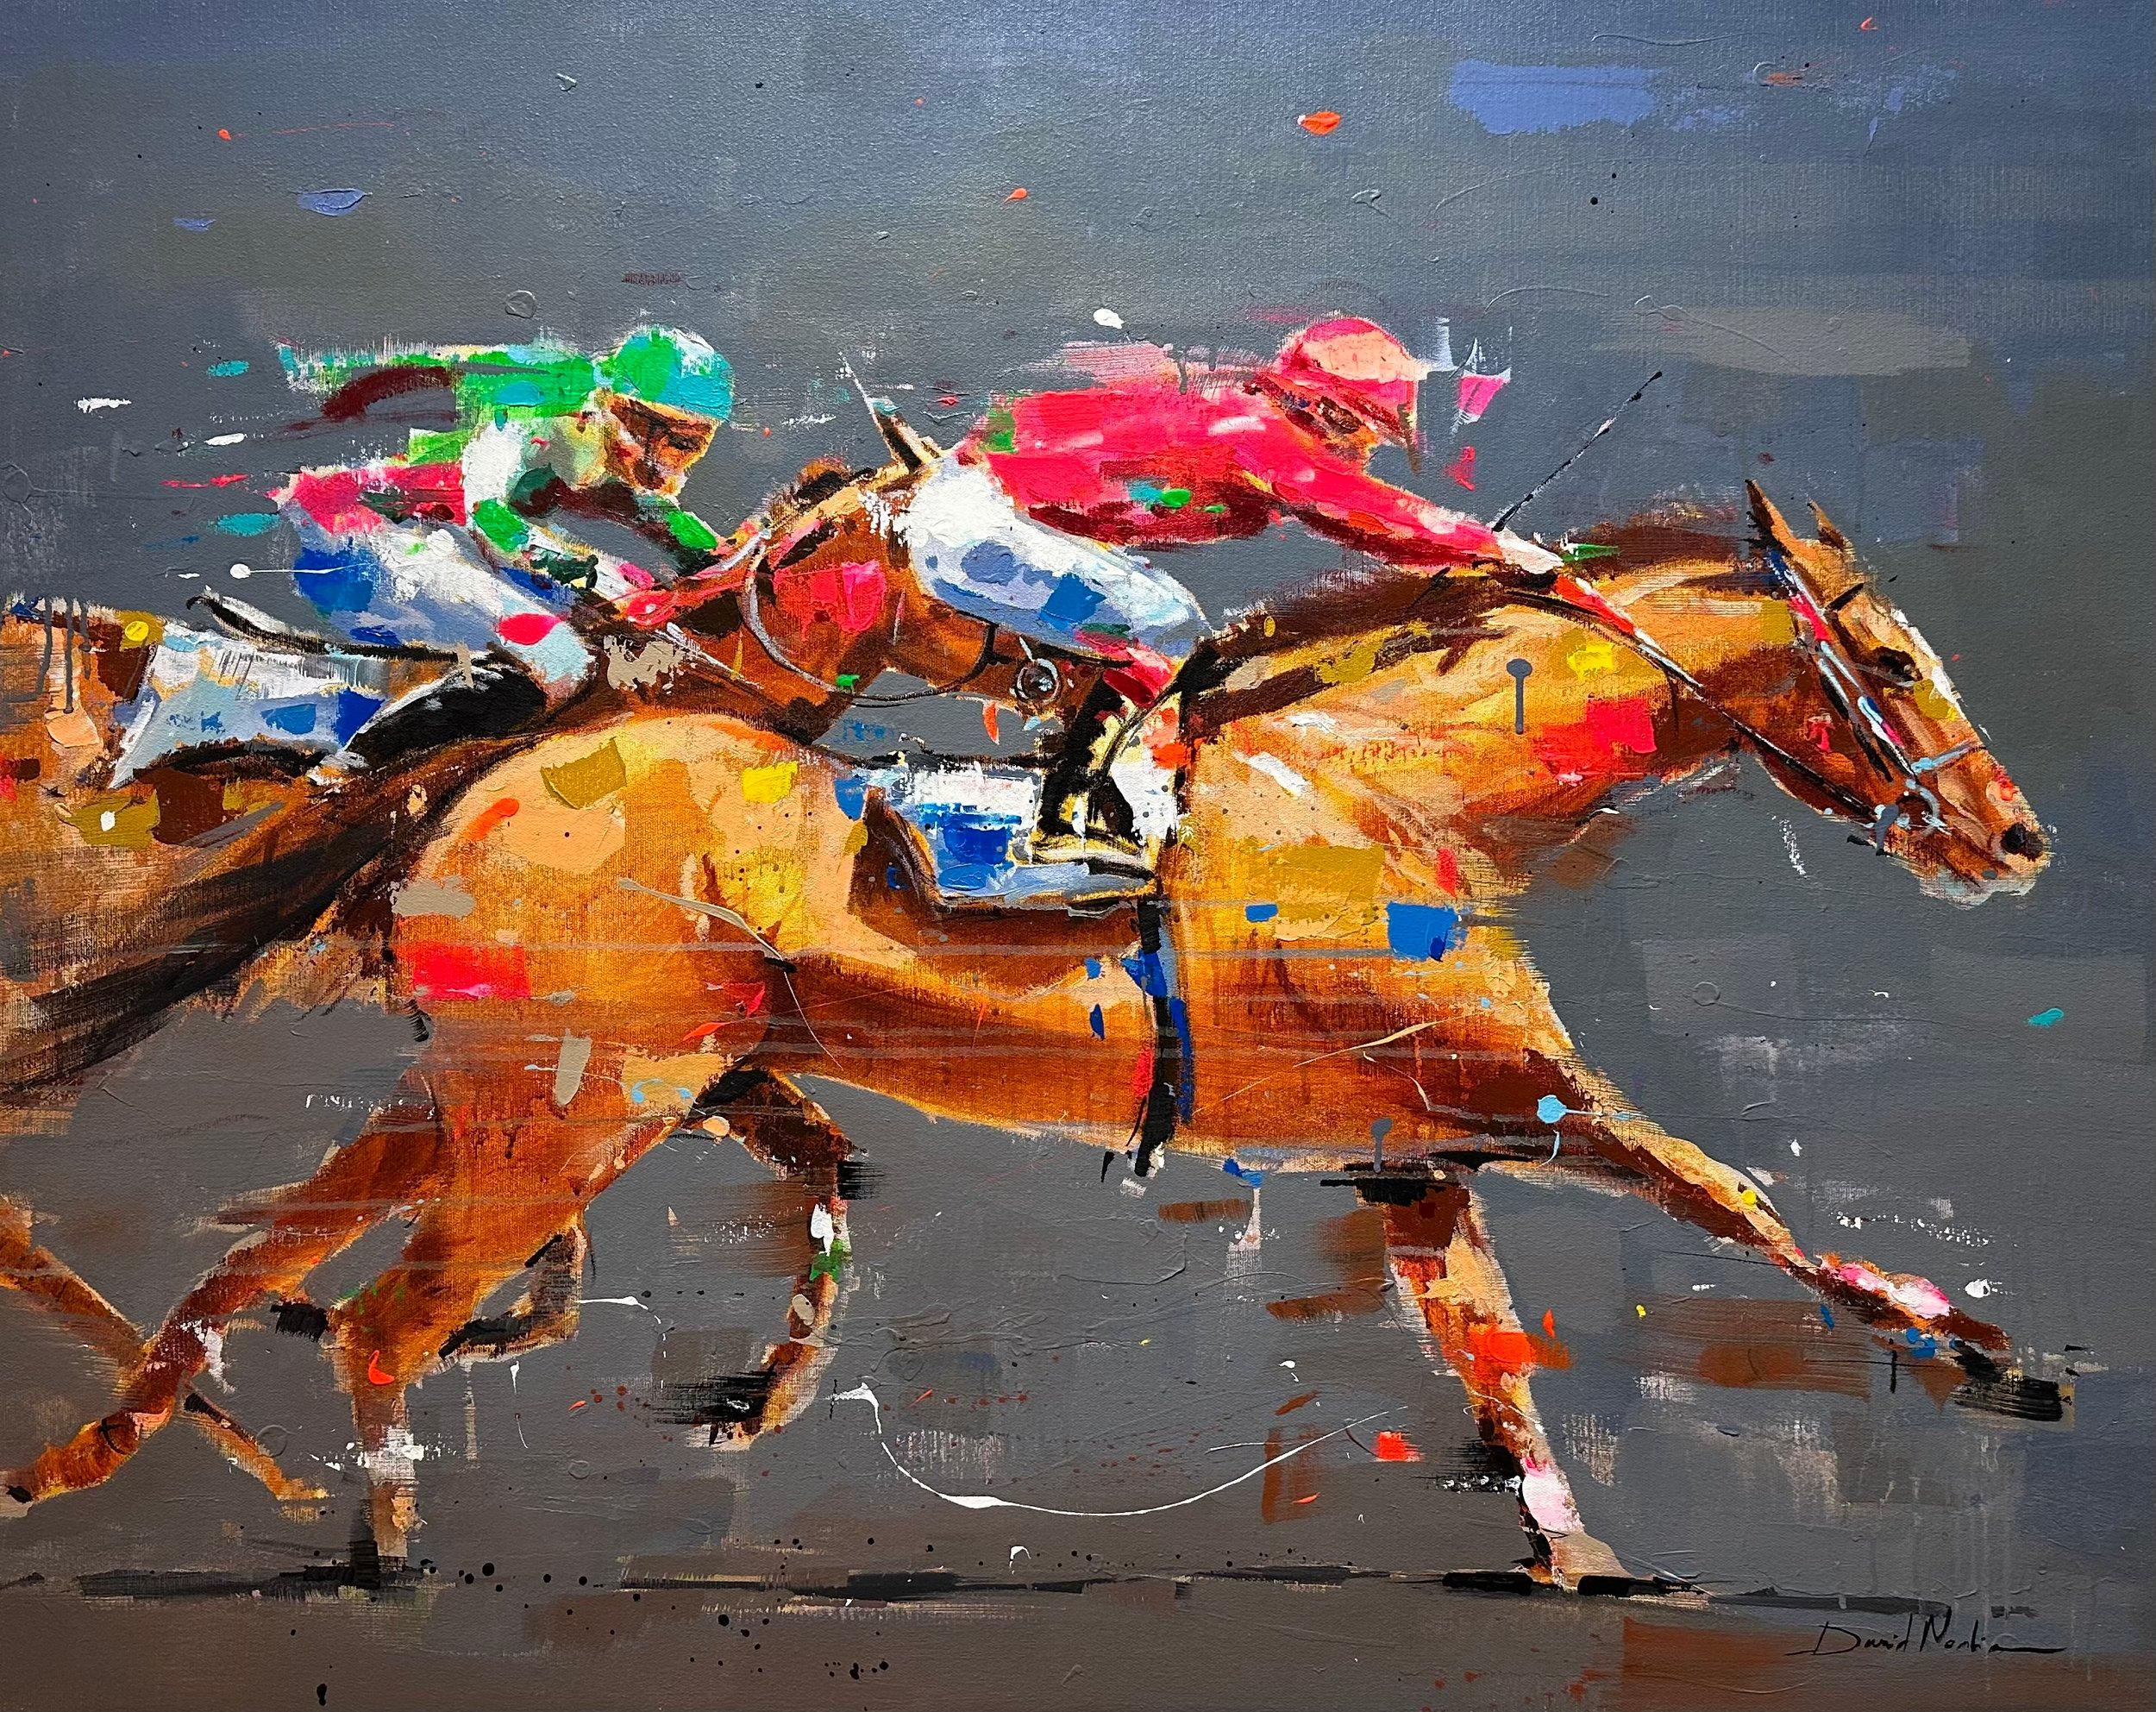 David Noalia, "Strong Stride" 36x45 Colorful Horse Racing Equine Painting